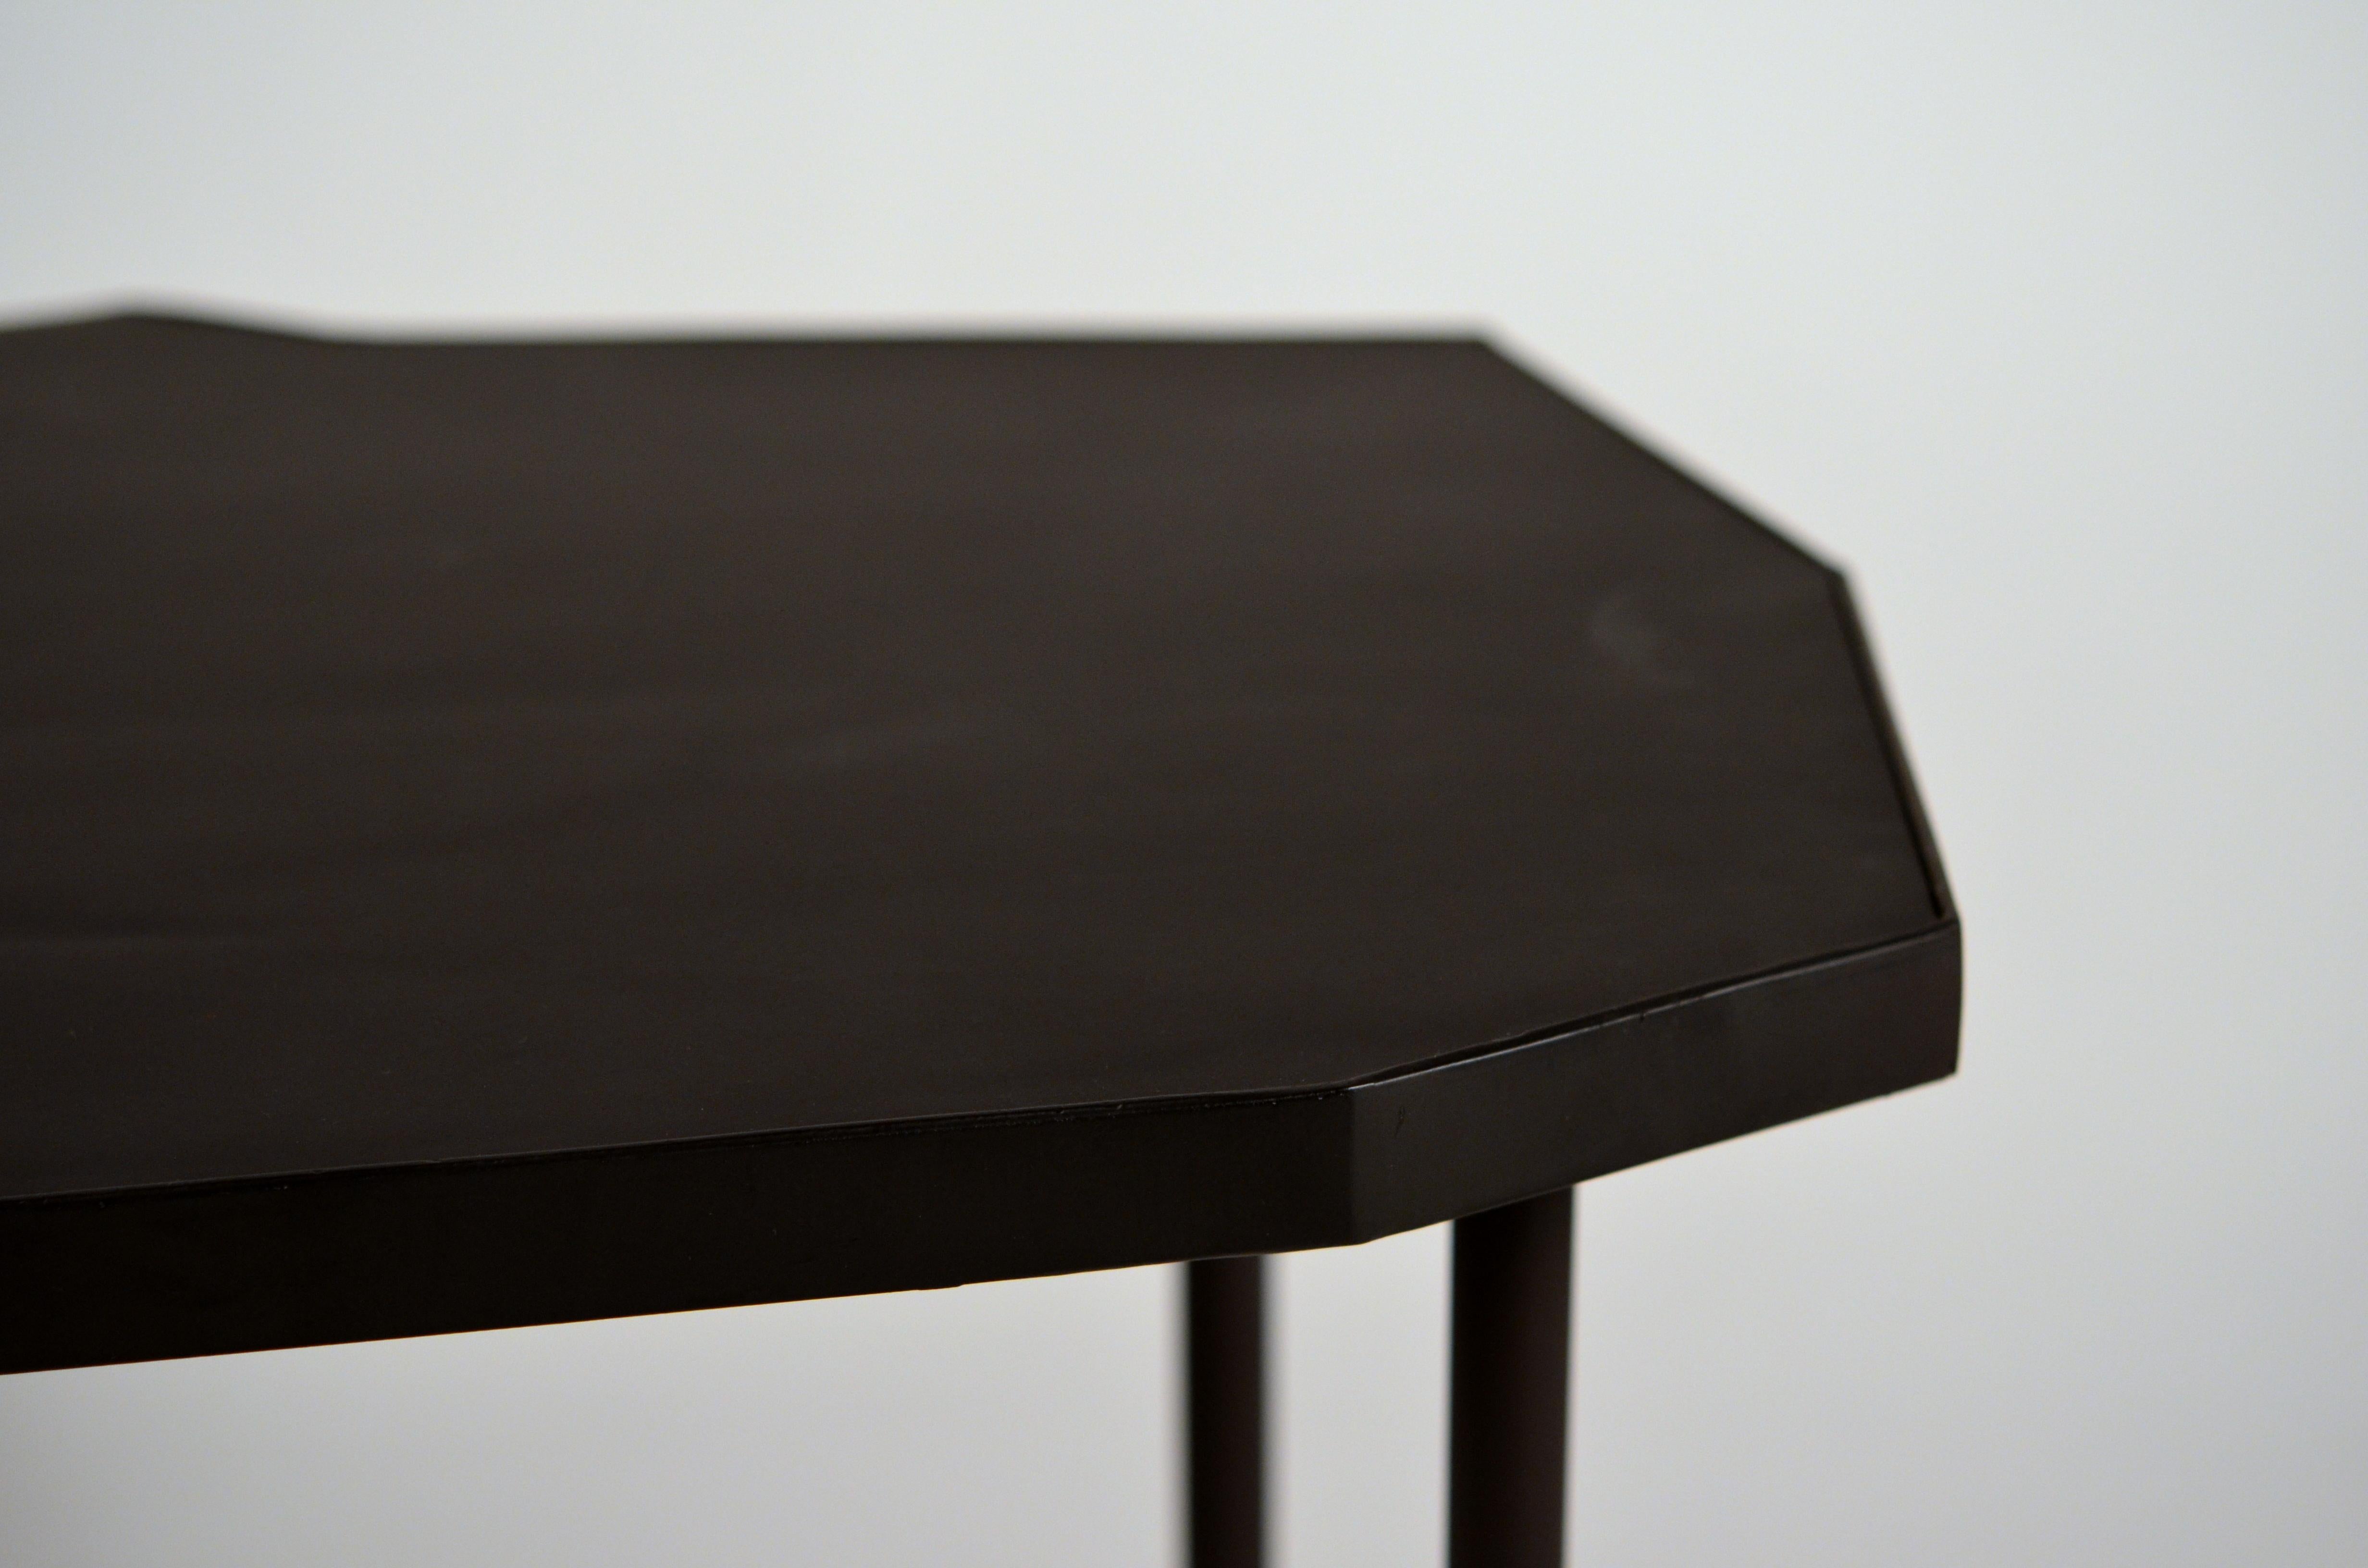 Pair of Asymmetrical 'Décagone' Black Leather Side Tables by Design Frères For Sale 3